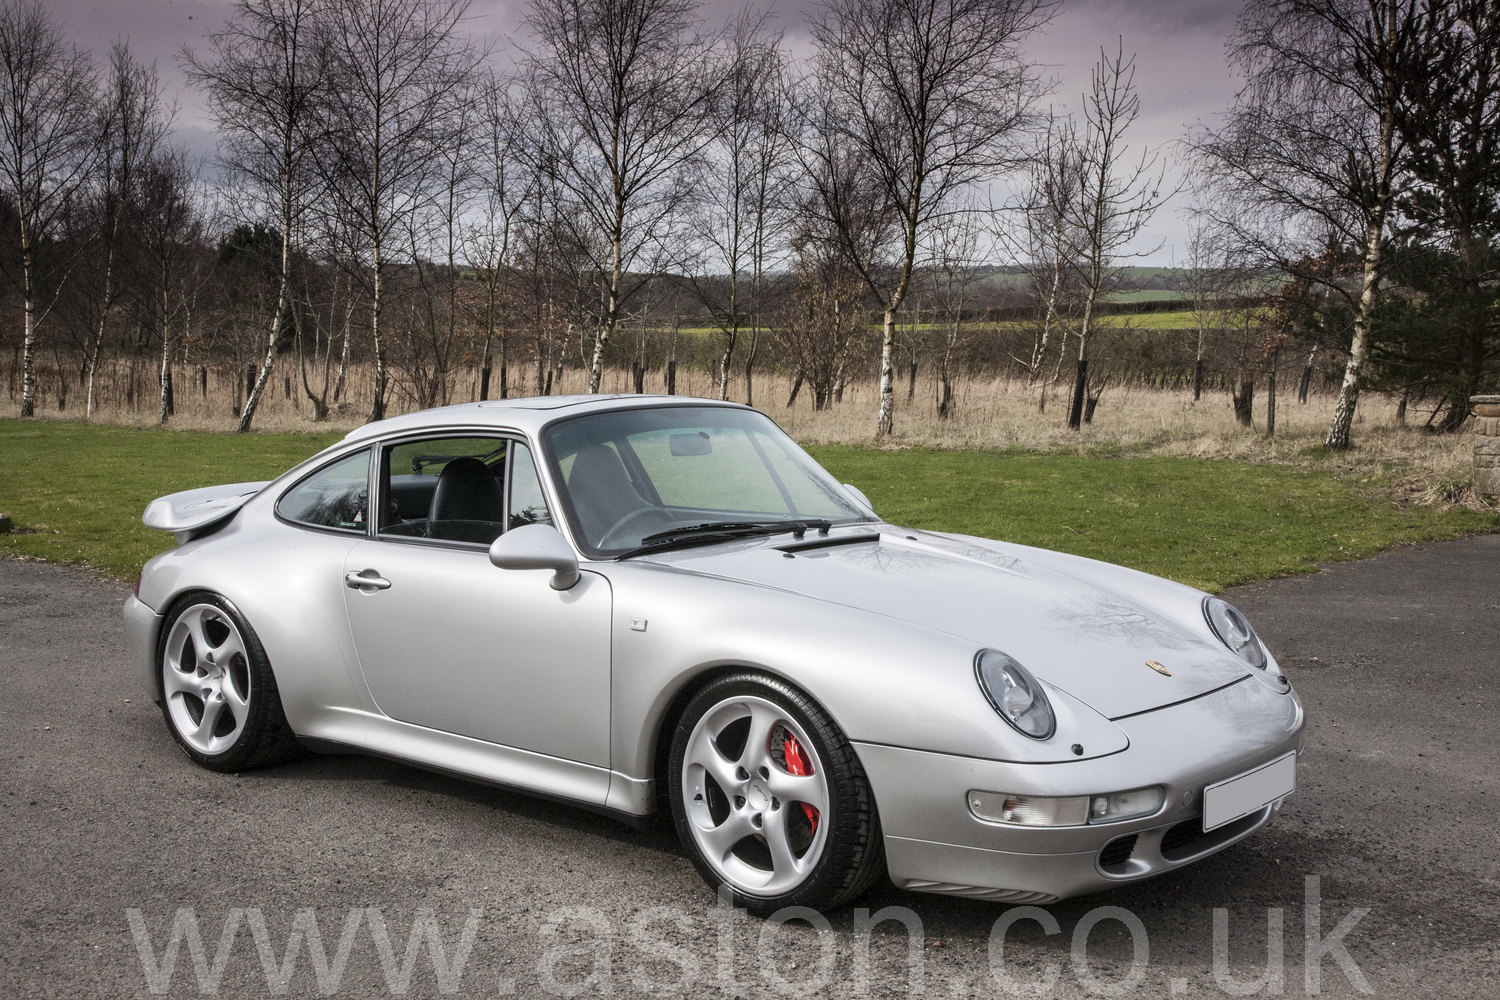 Porsche 993 Turbo - X50 Pack - for sale from Aston Workshop AW220317